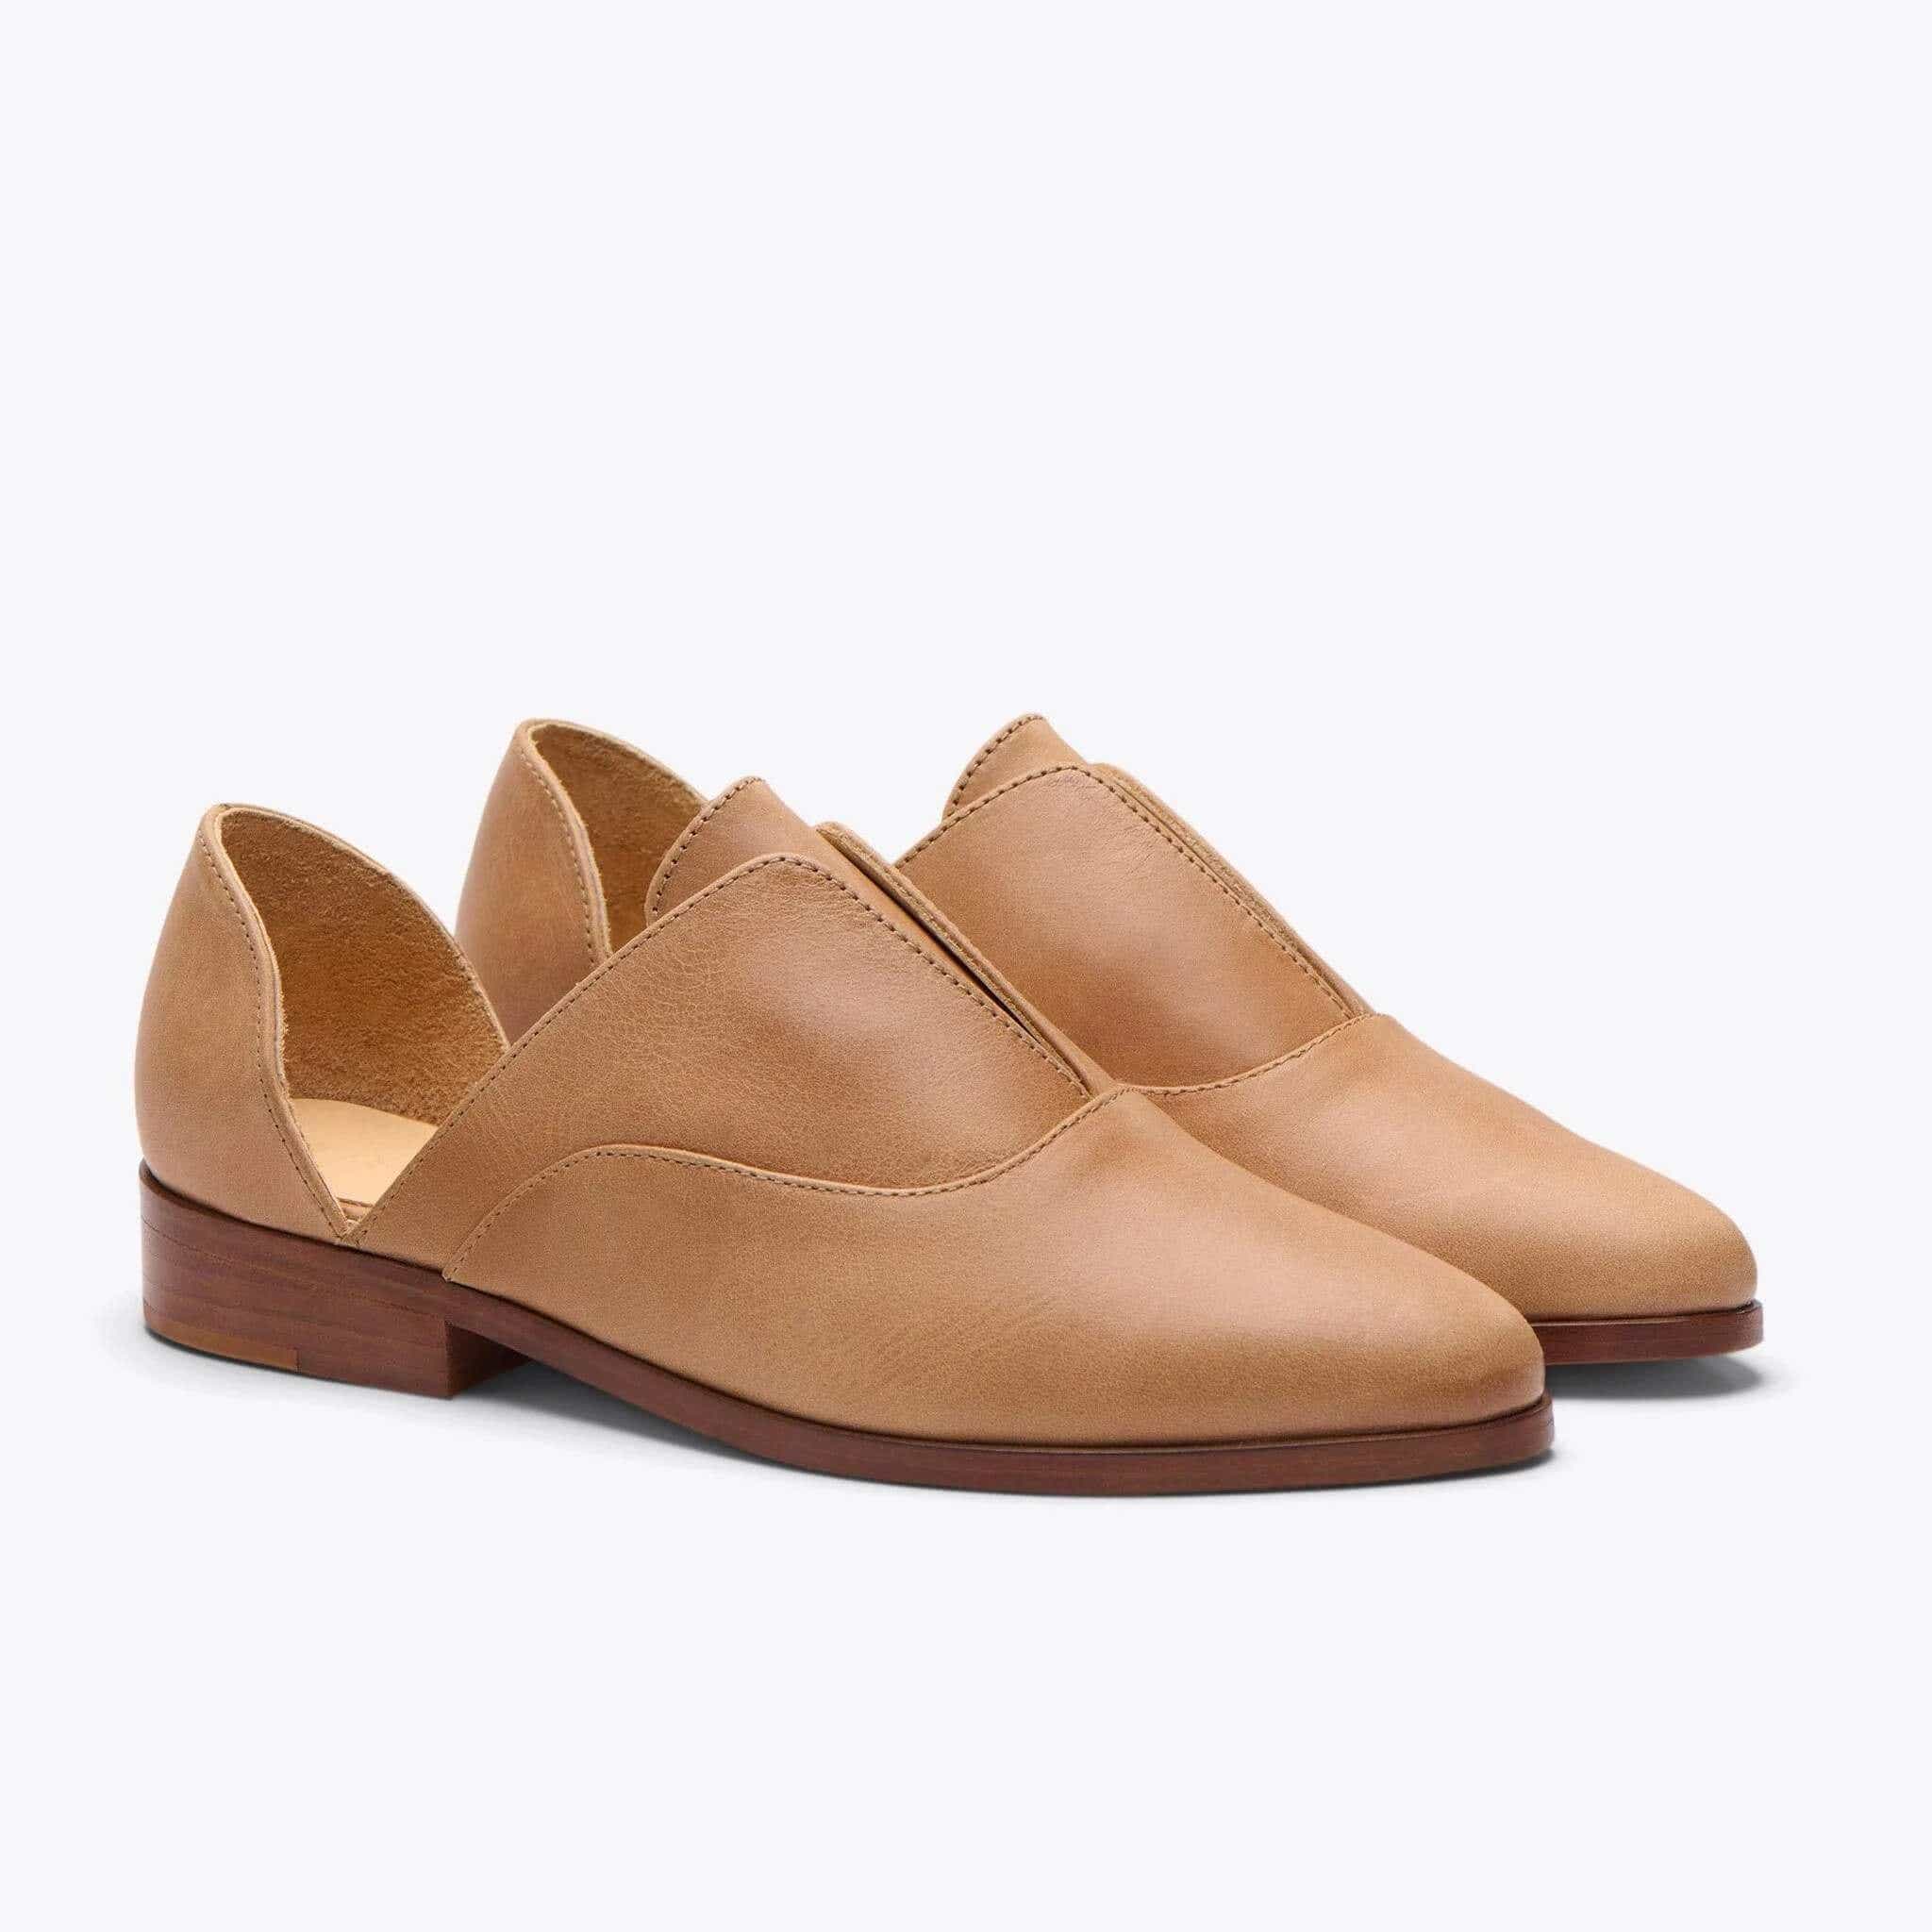 Amazon.com : Slip On Loafers Shoes for Women Comfort Classic Leather Flat  Shoes Casual Comfortable Round Toe Loafers Dress Shoes Ladies Driving  Office Walking Shoes : Sports & Outdoors